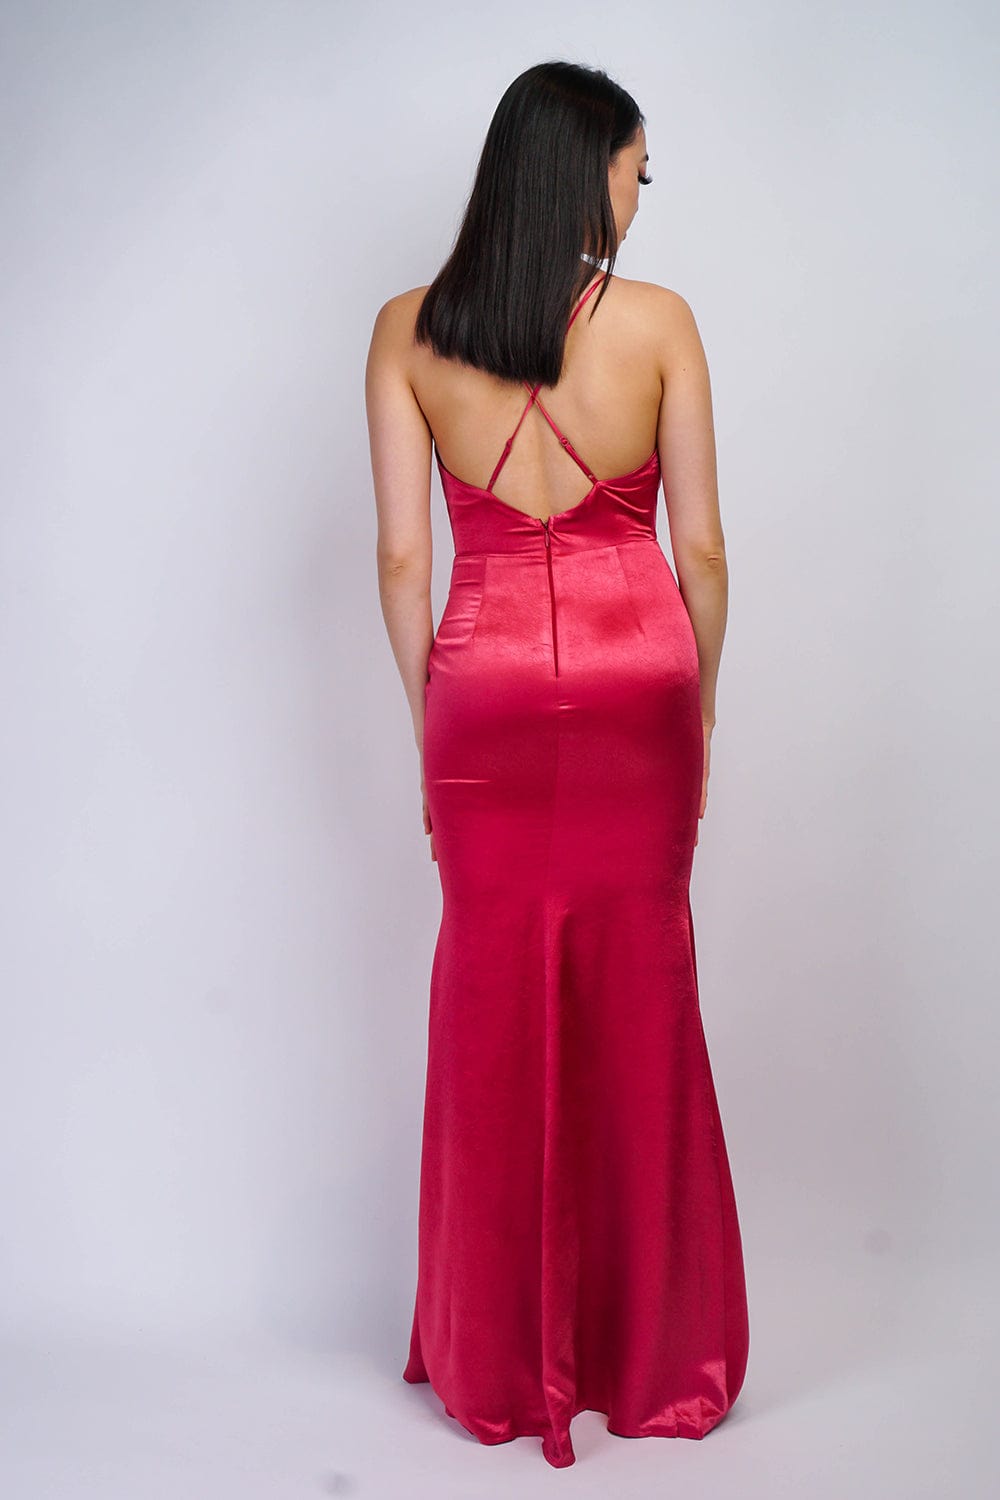 DCD GOWNS Berry Cowl Satin Gown